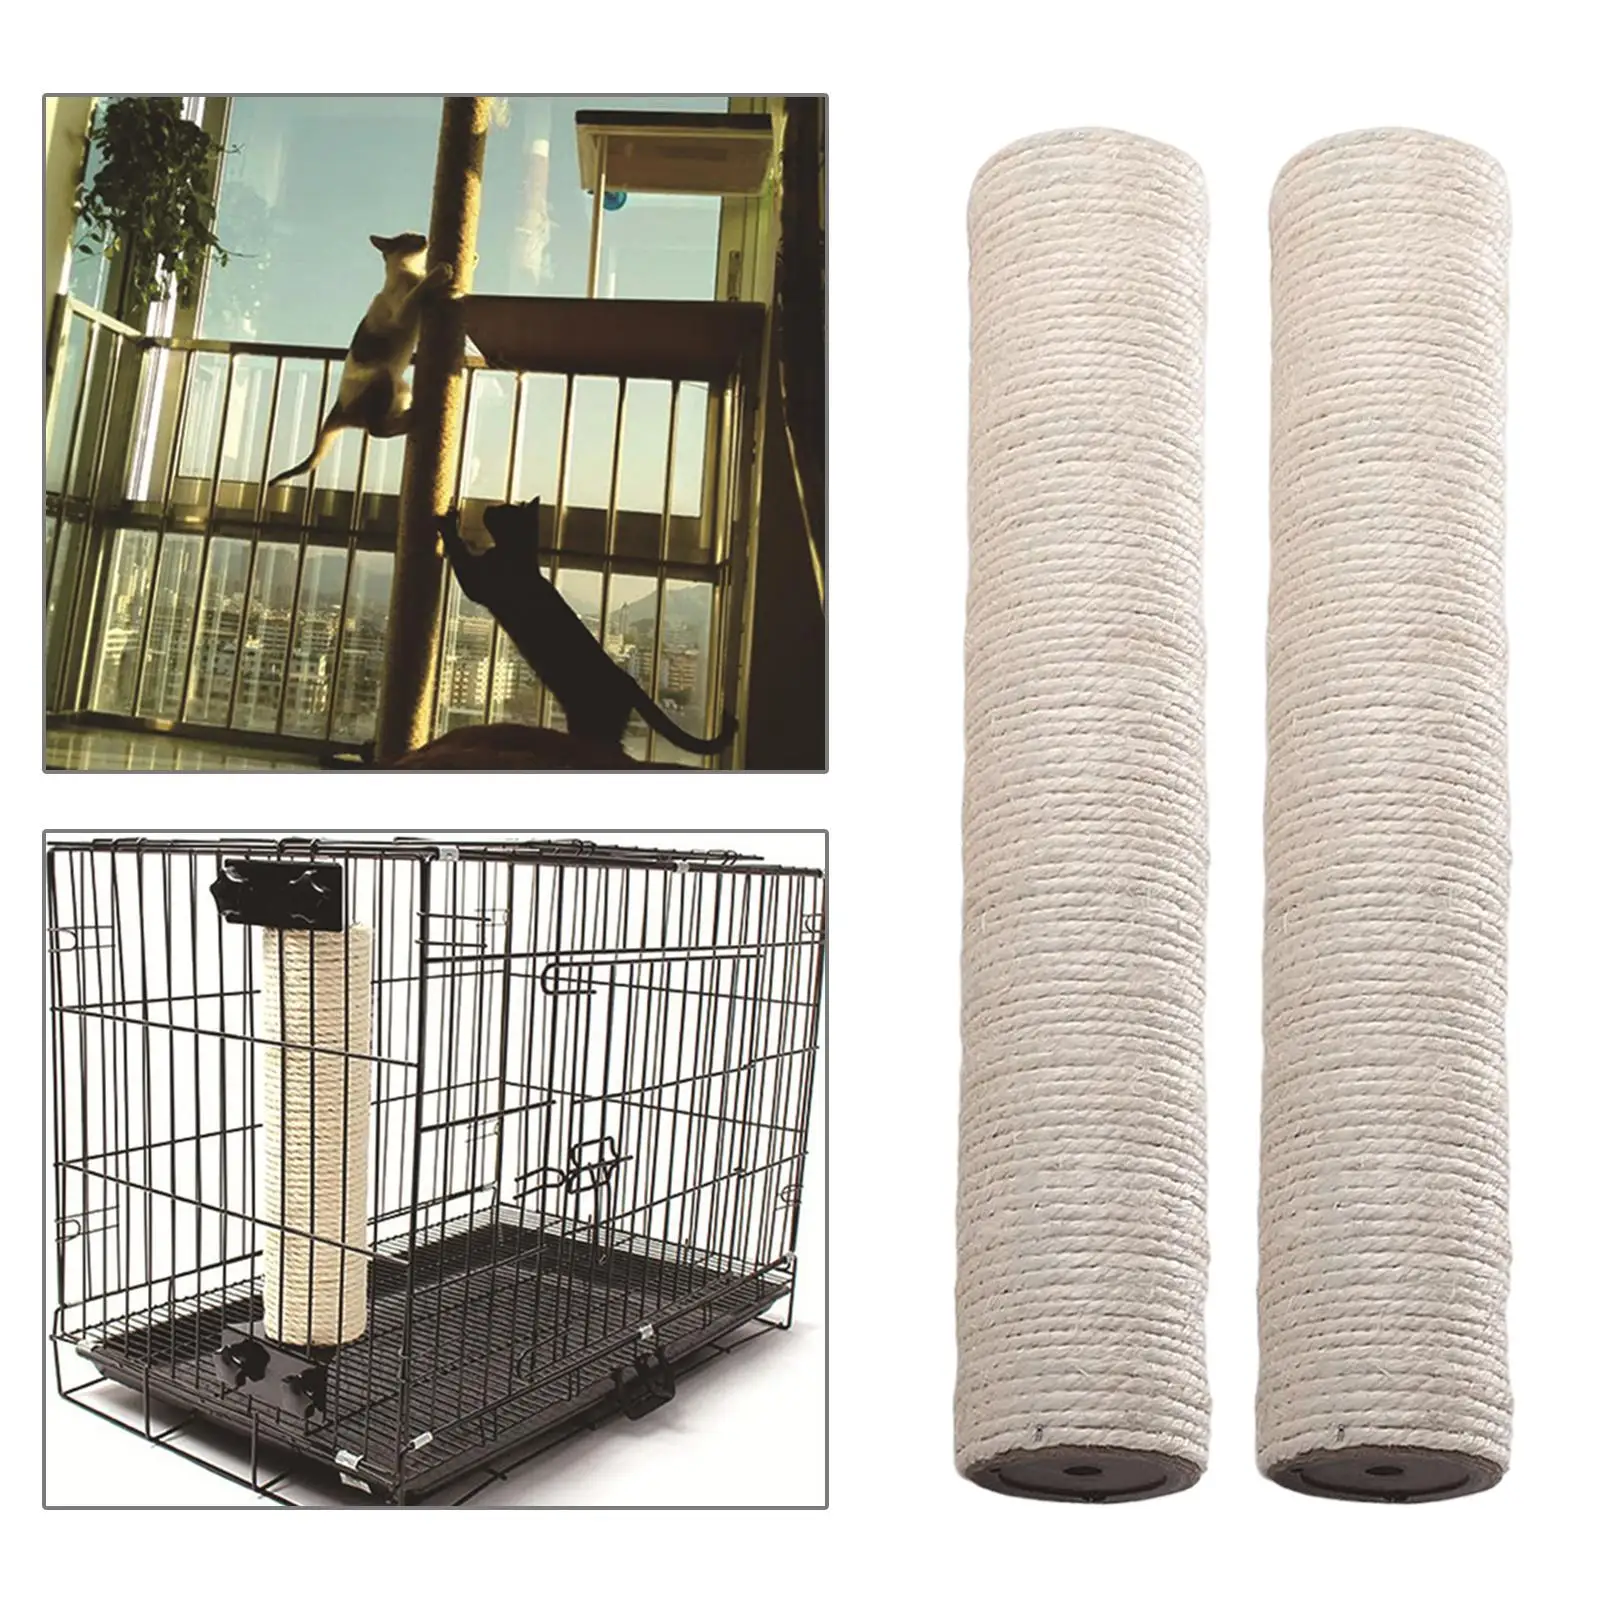 DIY Cat Scratching Post Replacement Parts Dia 2.75in Sofa Furniture Protector for Kitten Pet